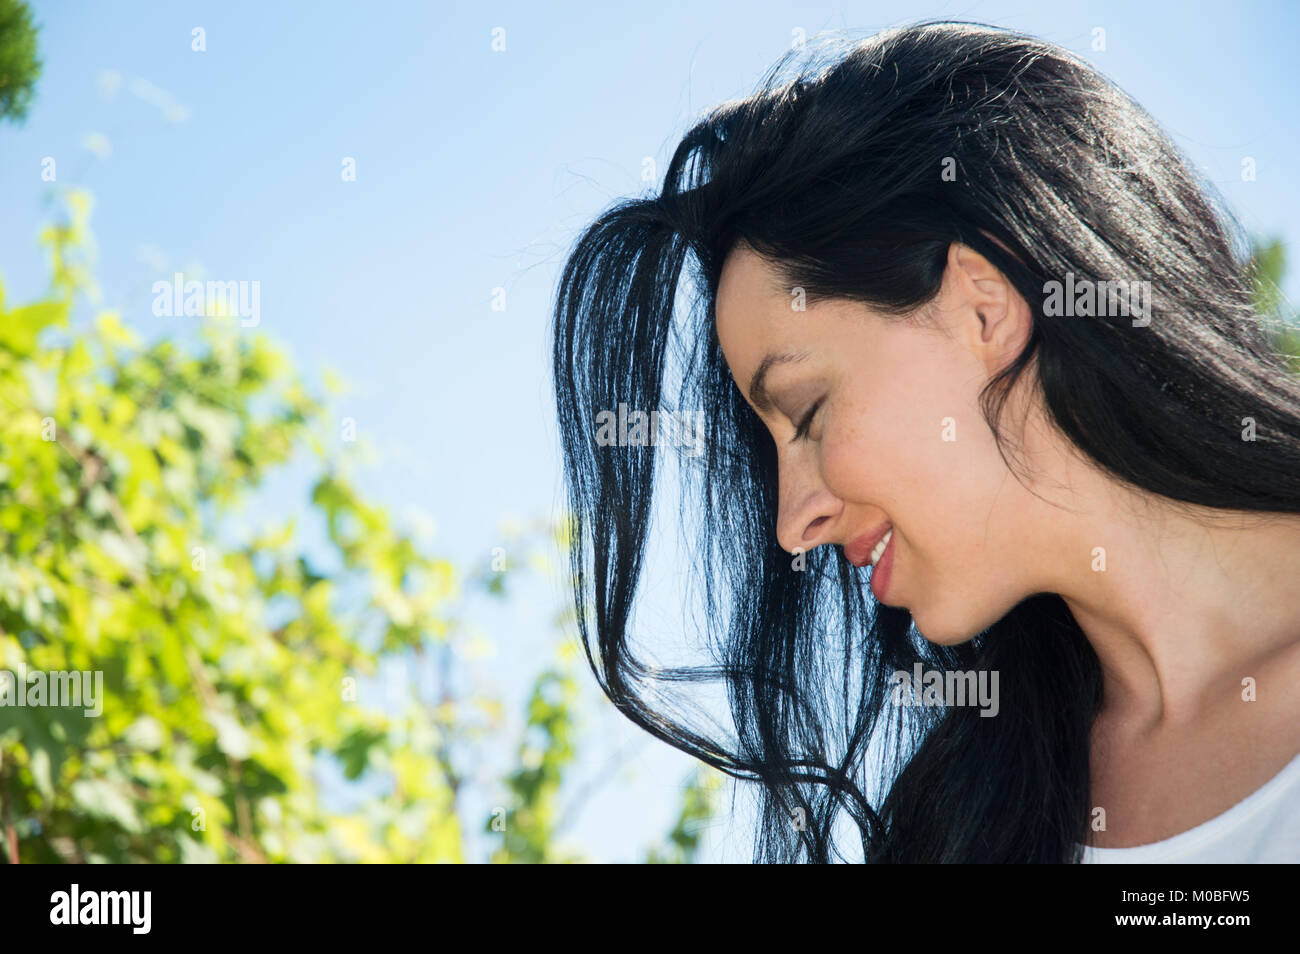 profile portrait of black-haired young woman, copy space Stock Photo